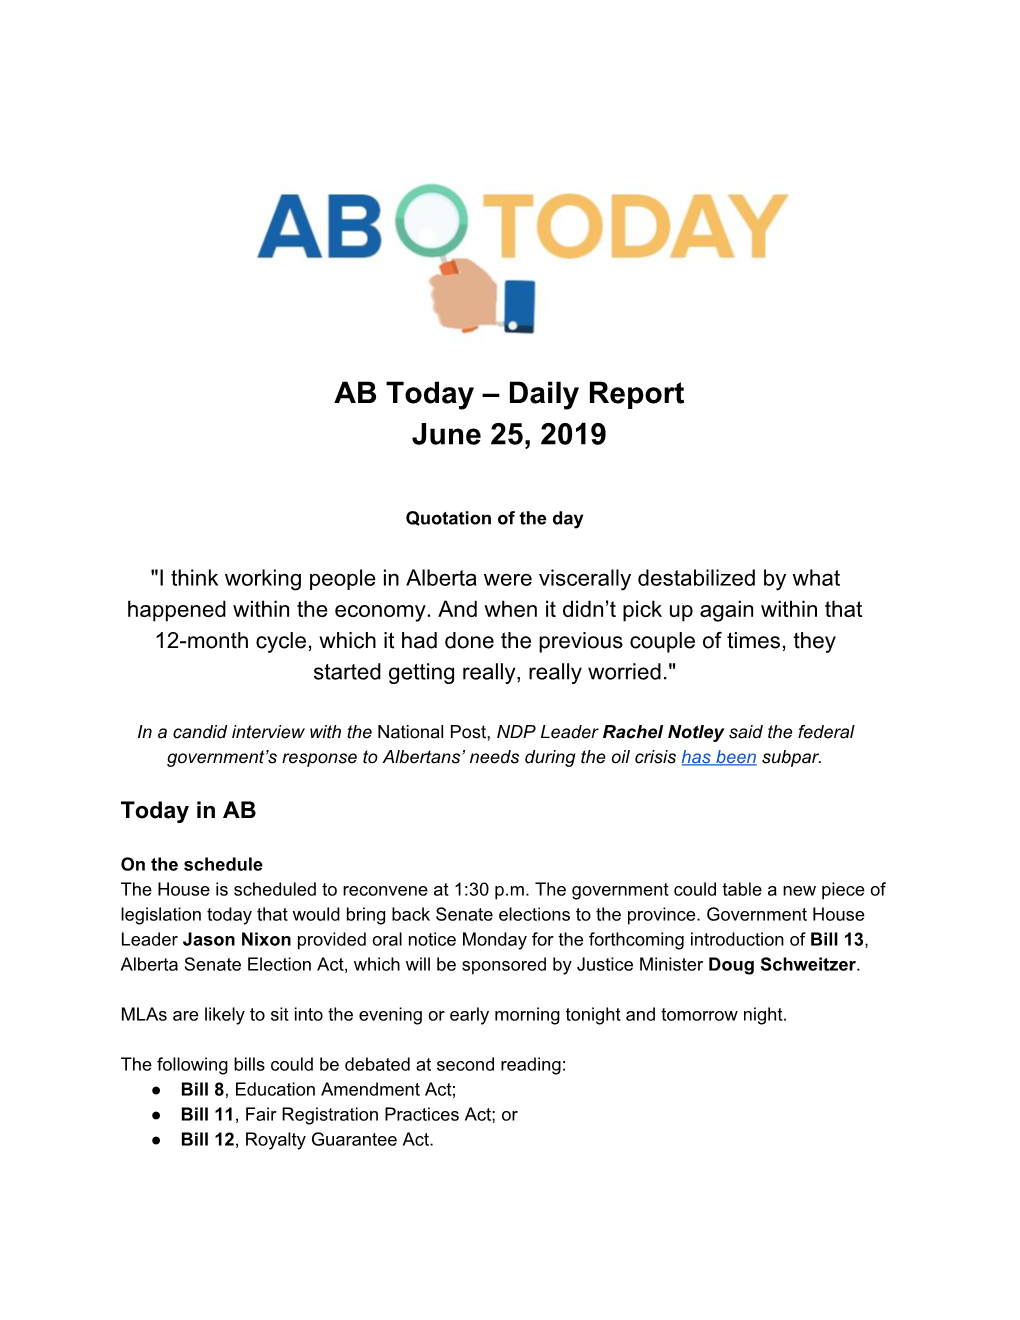 AB Today – Daily Report June 25, 2019